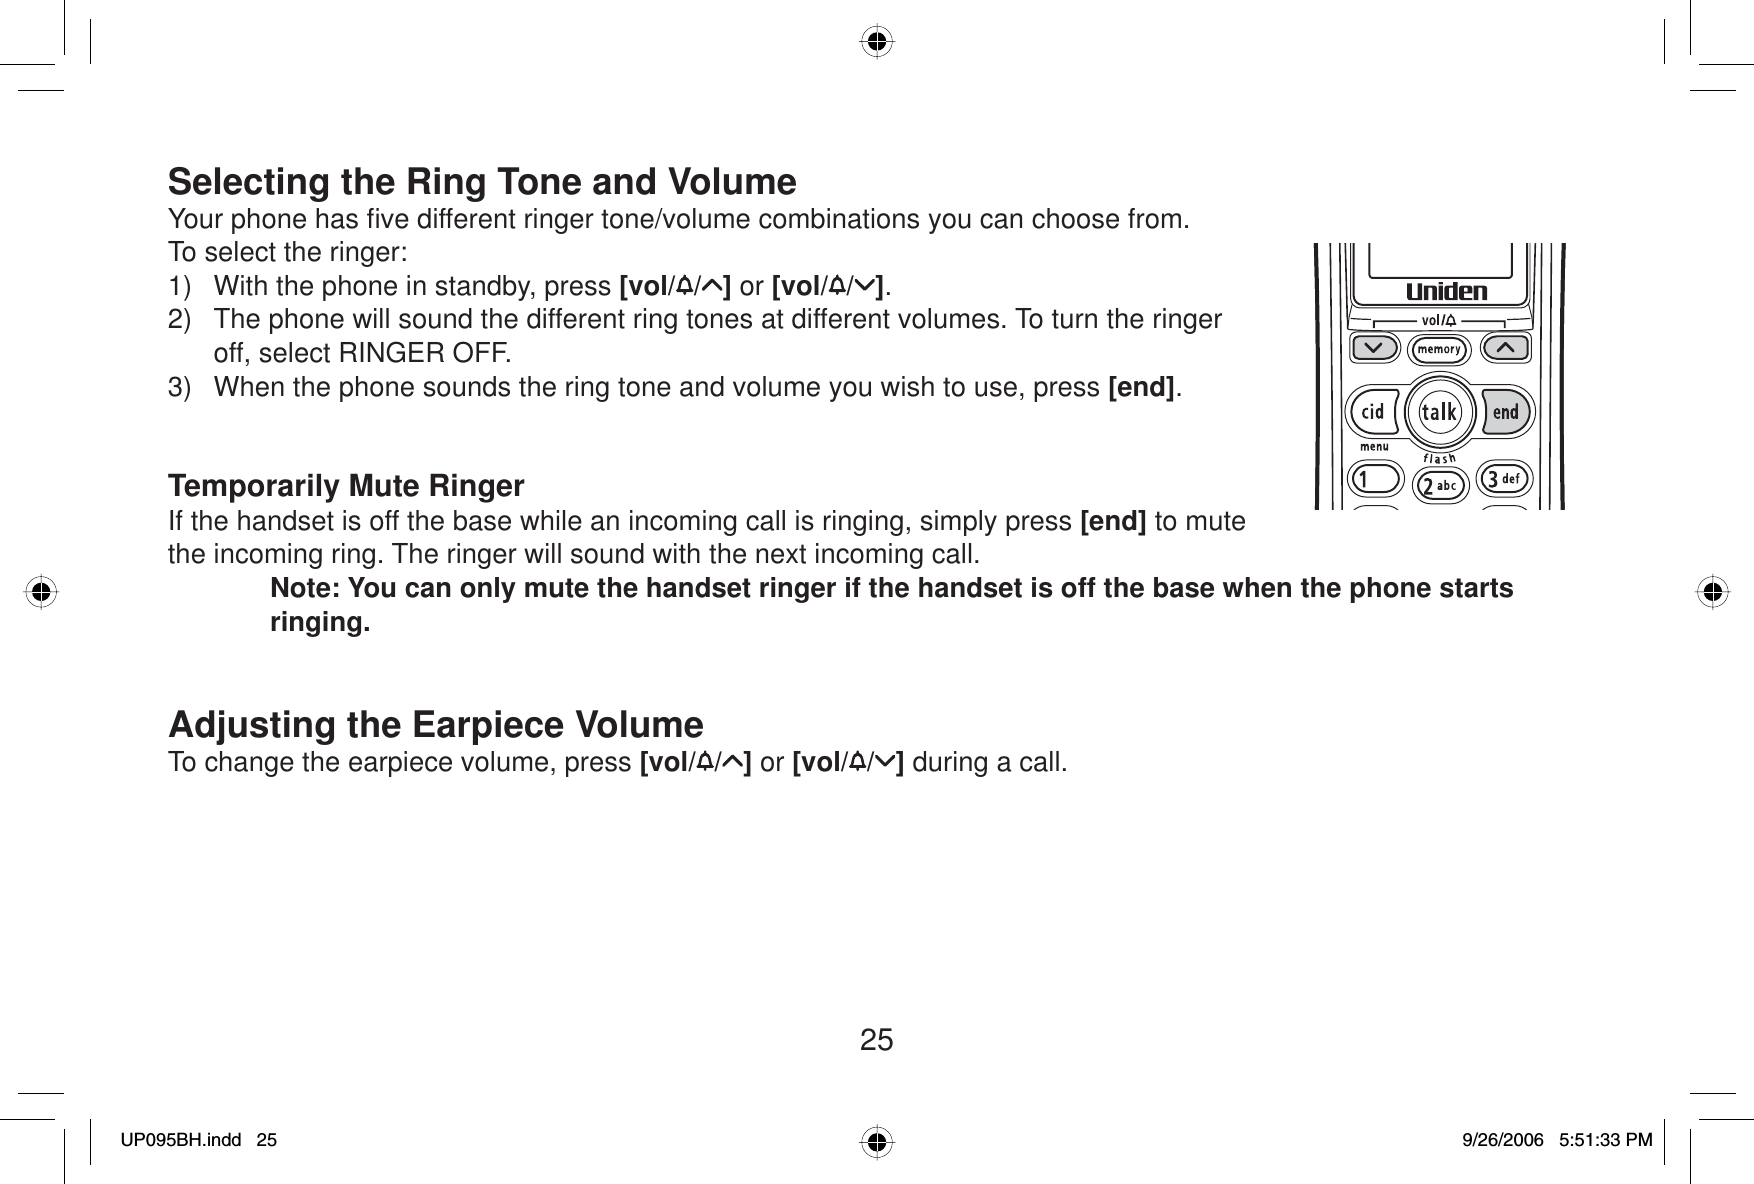 25Selecting the Ring Tone and VolumeYour phone has ﬁ ve different ringer tone/volume combinations you can choose from.To select the ringer:1)  With the phone in standby, press [vol/ / ] or [vol/ / ].2)  The phone will sound the different ring tones at different volumes. To turn the ringer off, select RINGER OFF.3)  When the phone sounds the ring tone and volume you wish to use, press [end].Temporarily Mute RingerIf the handset is off the base while an incoming call is ringing, simply press [end] to mute the incoming ring. The ringer will sound with the next incoming call. Note: You can only mute the handset ringer if the handset is off the base when the phone starts ringing.Adjusting the Earpiece VolumeTo change the earpiece volume, press [vol/ / ] or [vol/ / ] during a call.UP095BH.indd 25UP095BH.indd   259/26/2006 5:51:33 PM9/26/2006   5:51:33 PM